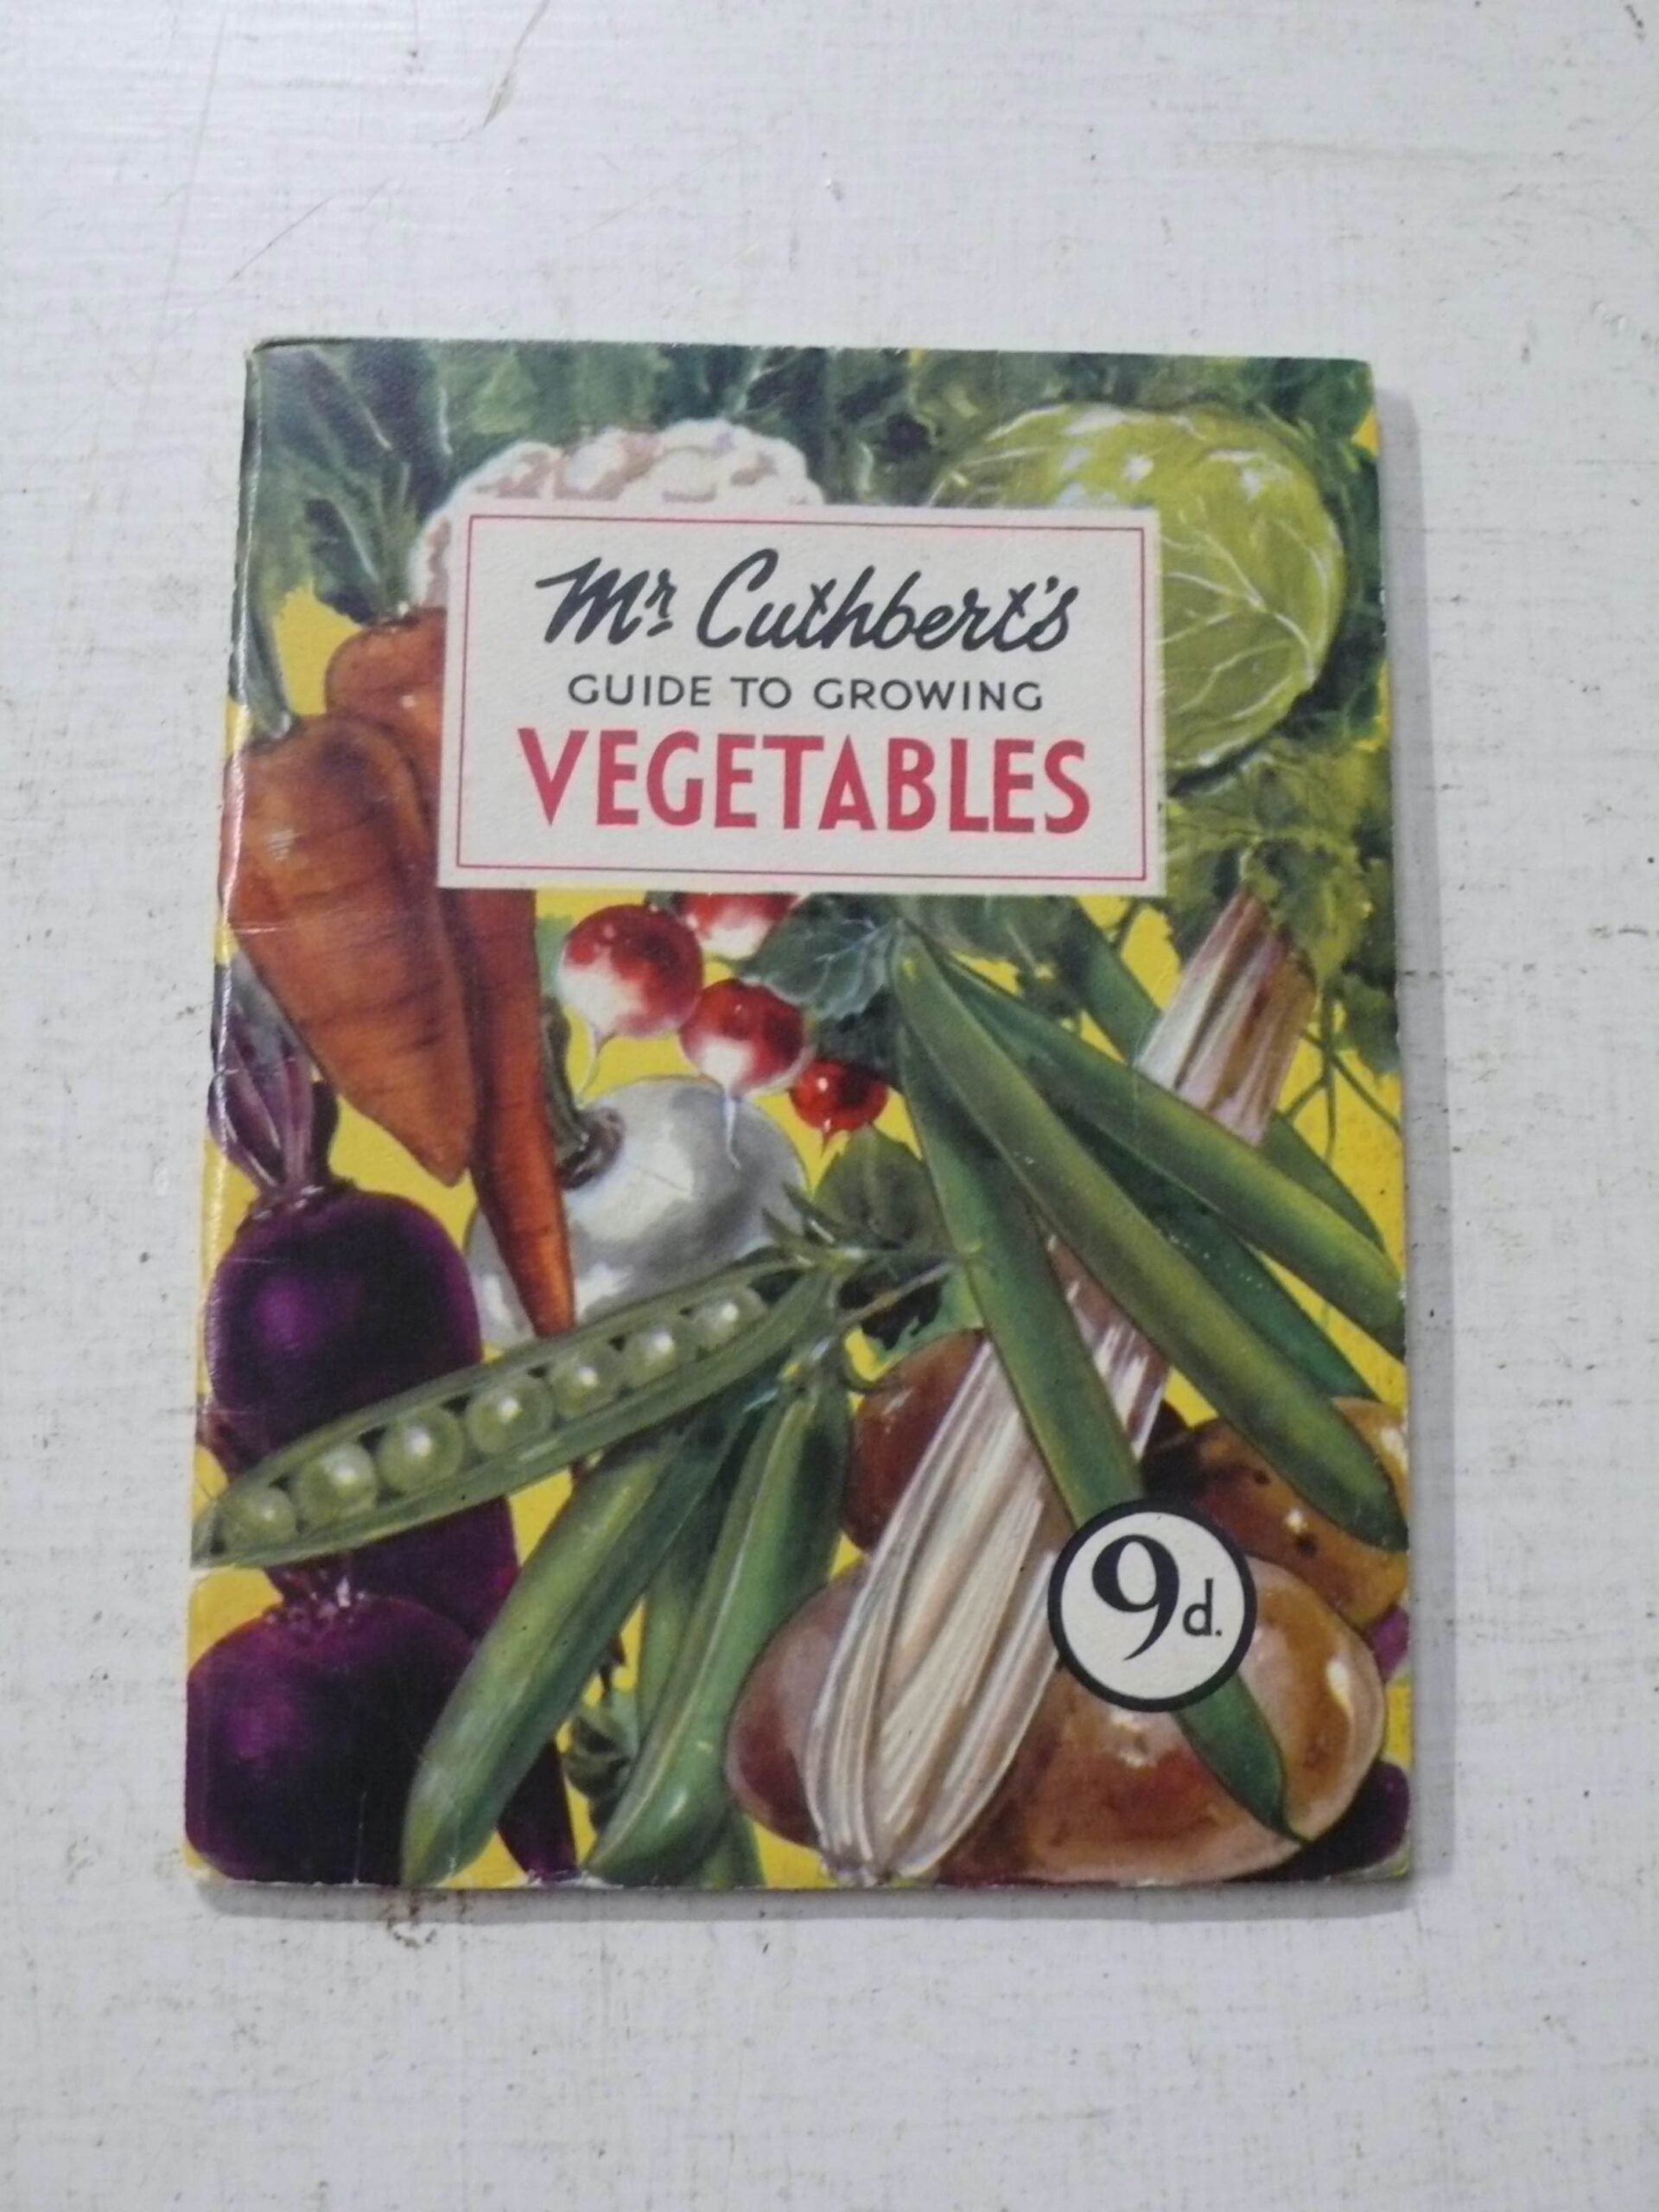 Mr Cuthberts Vegetables Guide